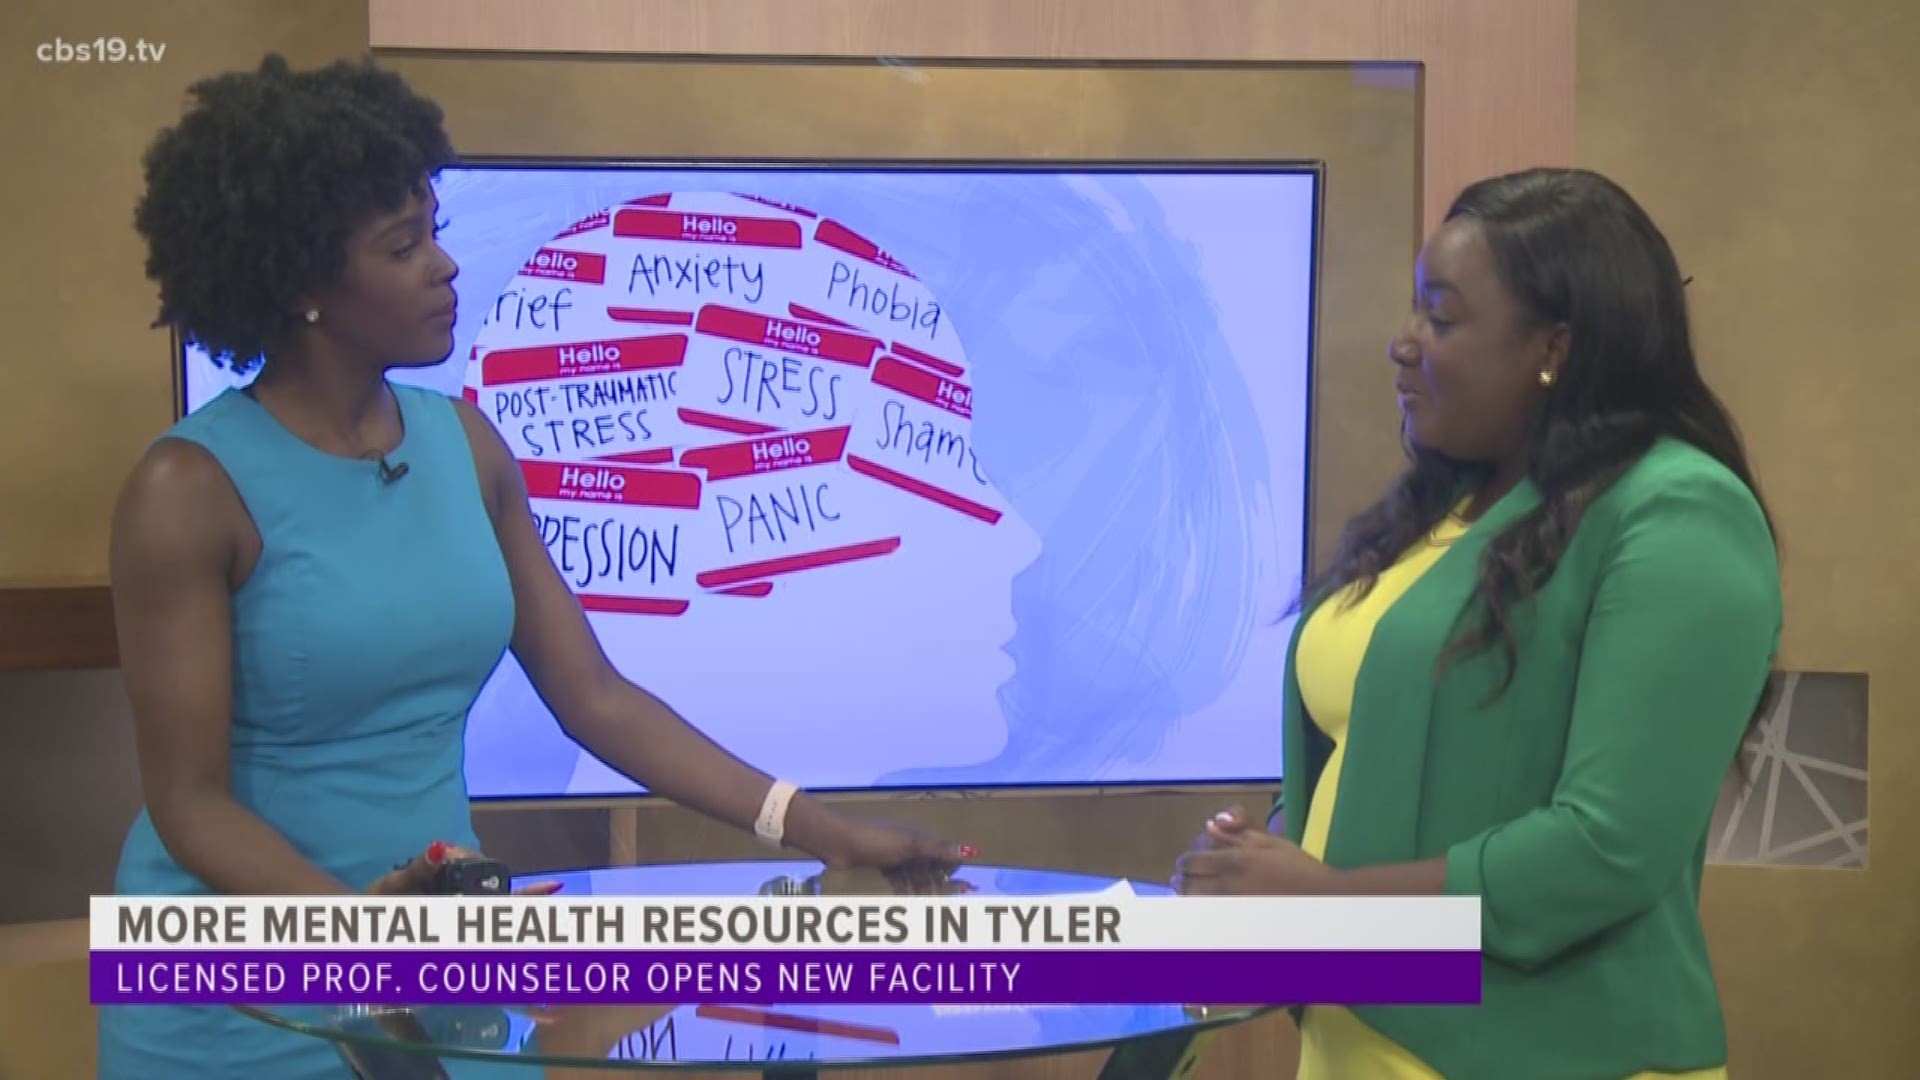 New counseling center in Tyler providing more mental health resources